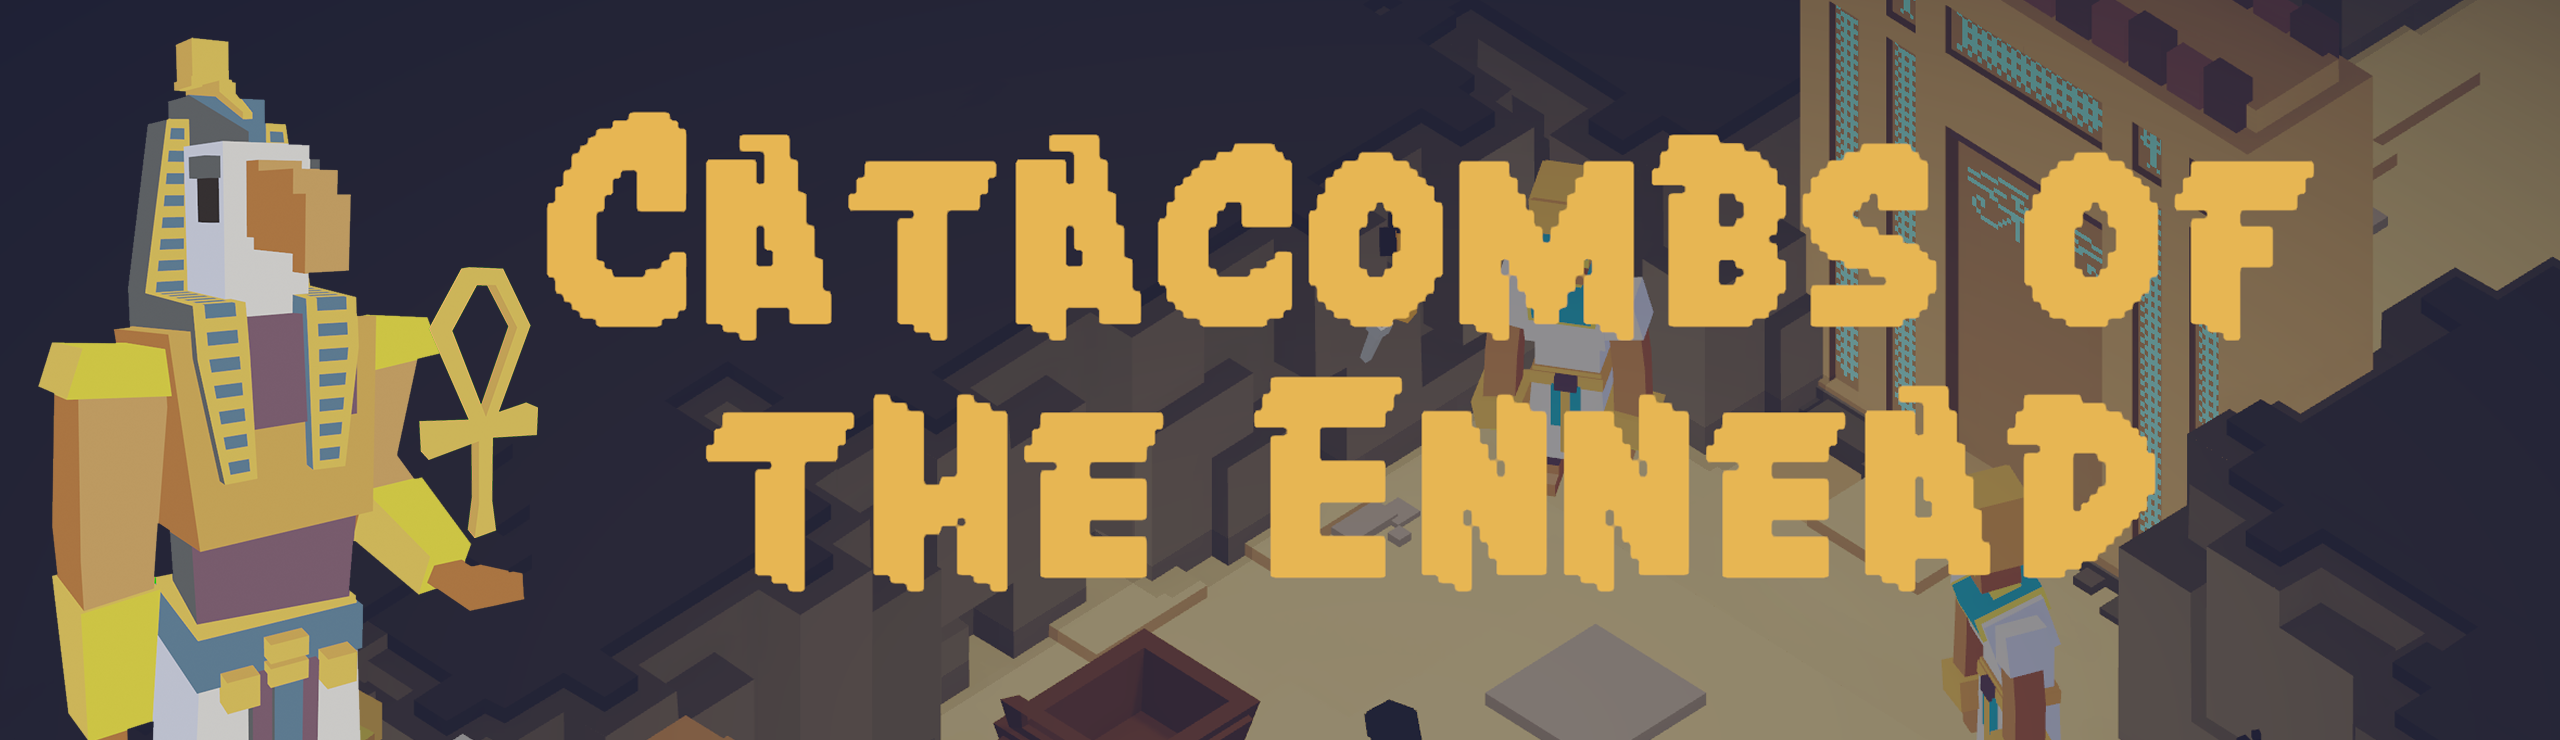 Catacombes of the Ennead